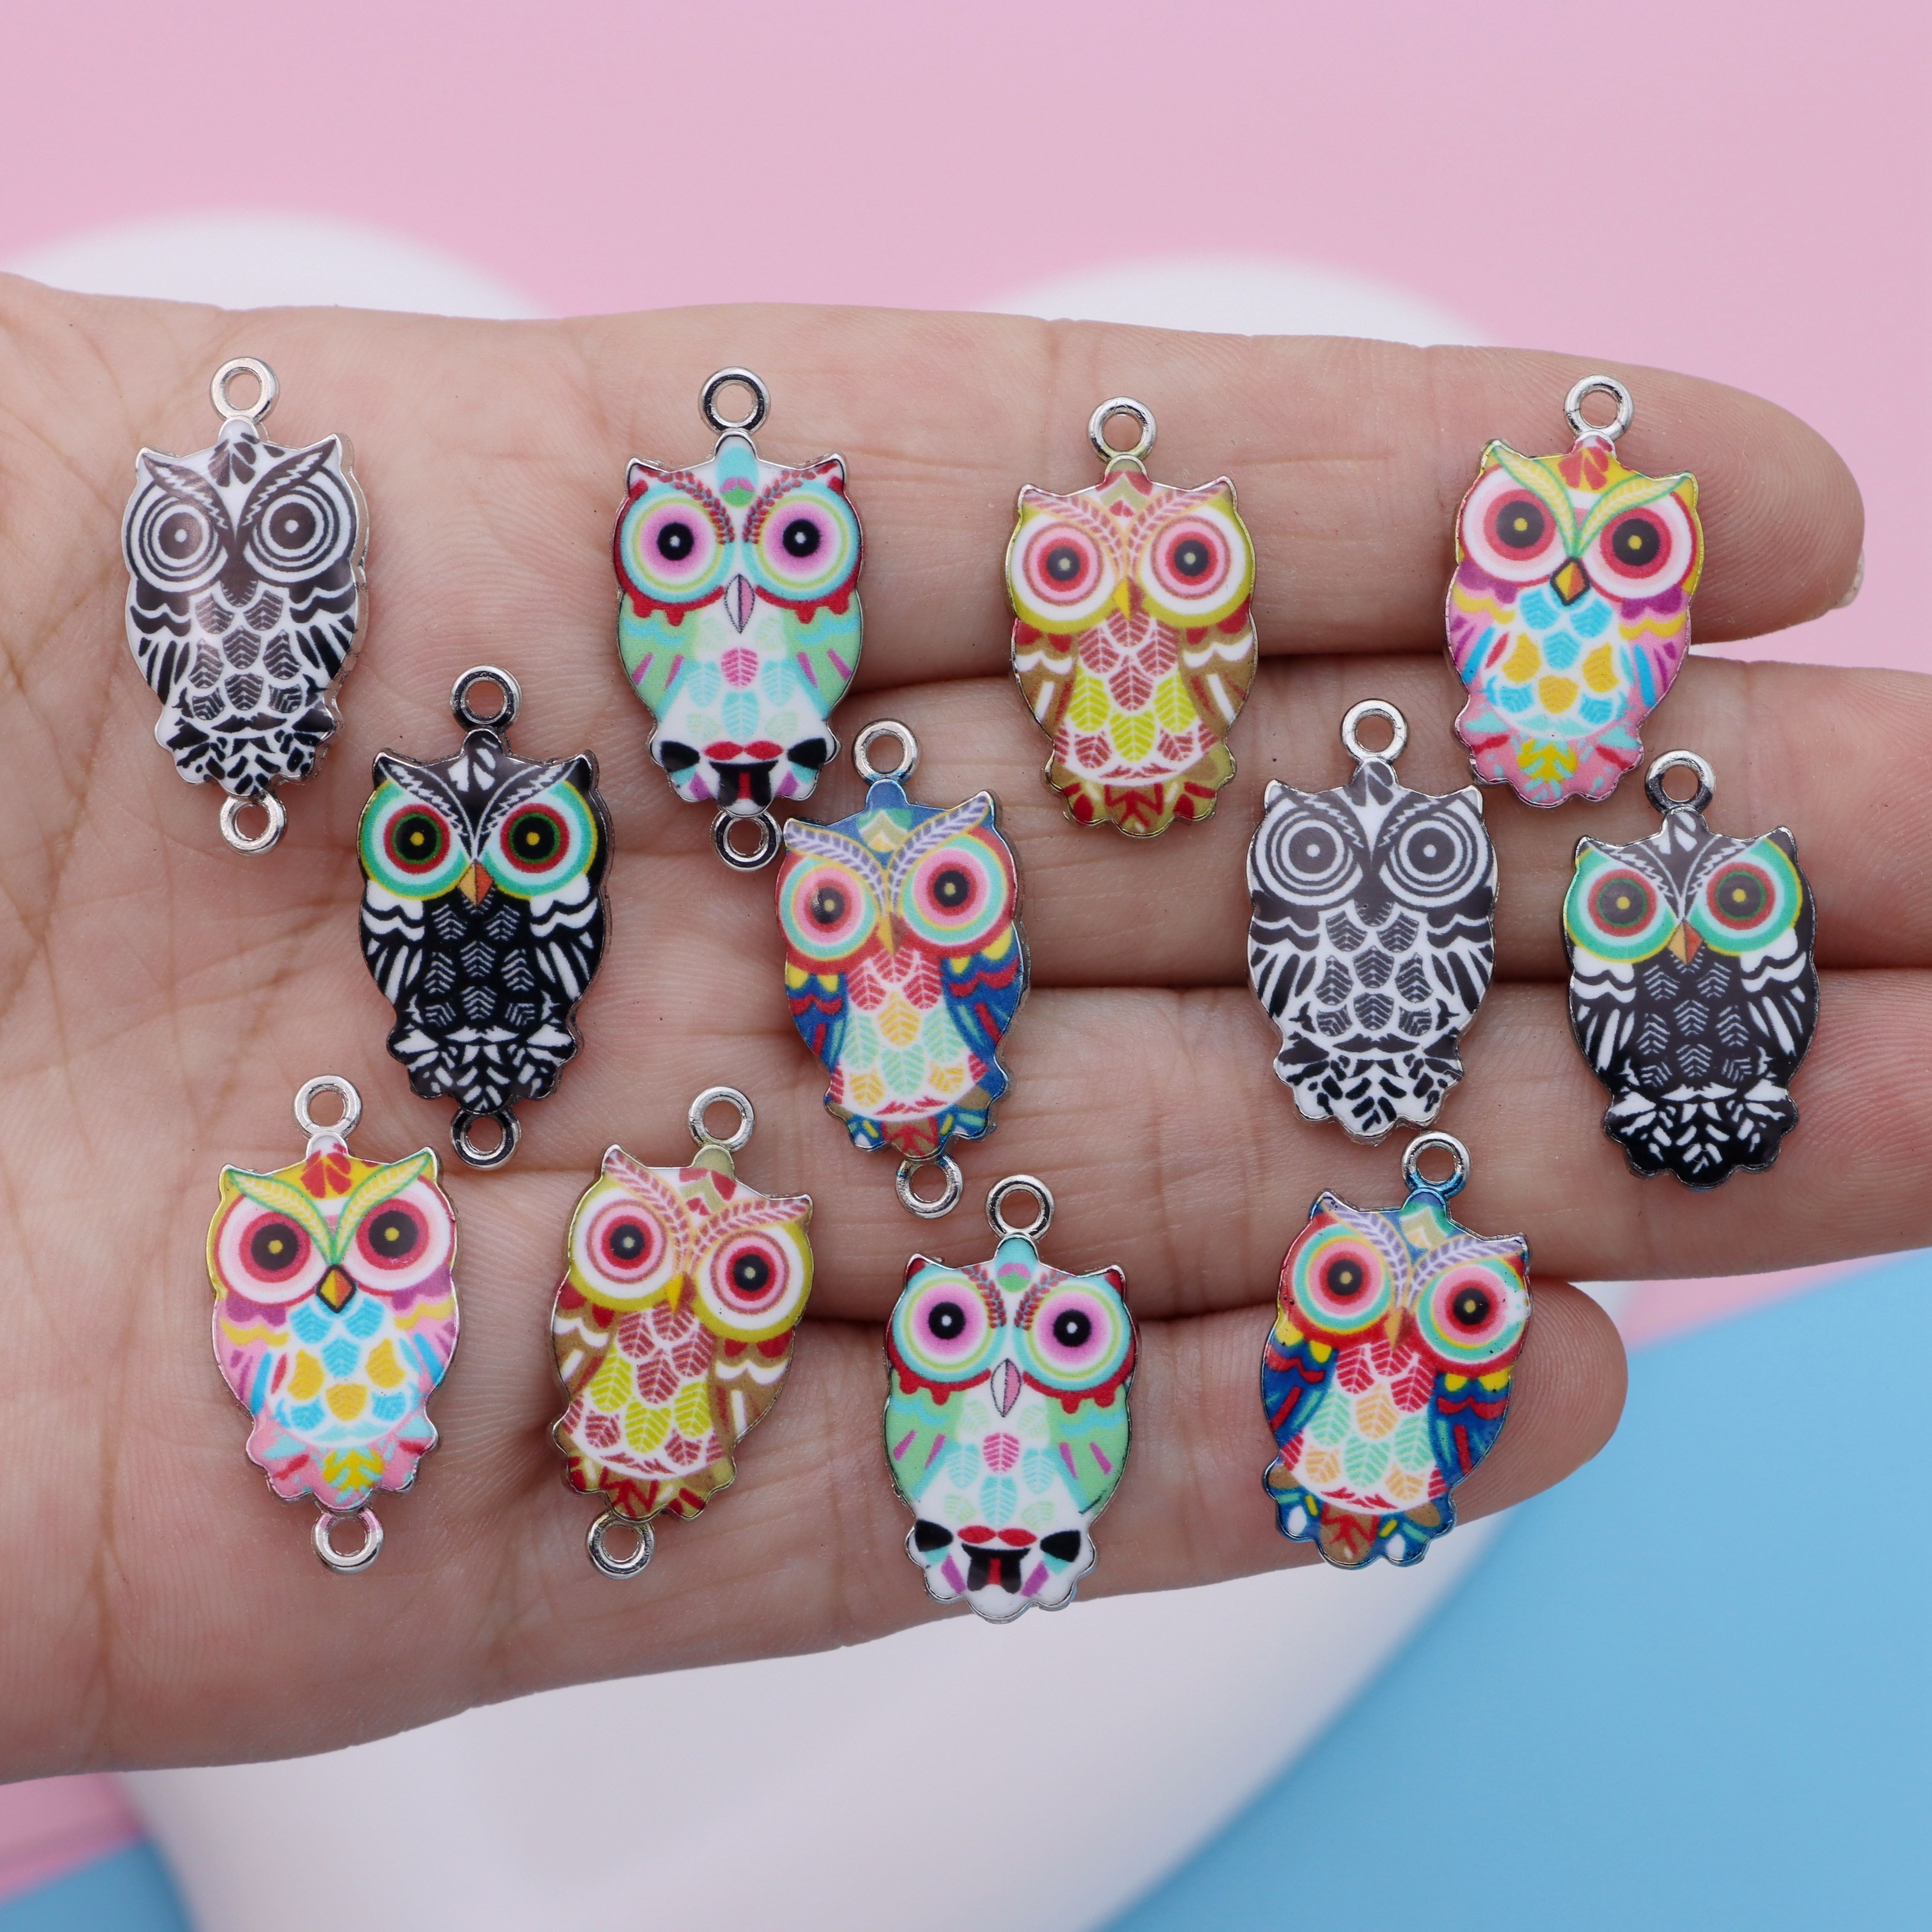  TEHAUX Parrot Pendant Bracelet Making Charms Animal  Charmspendant Bracelet Parrot Bead Charms Bracelets Parrot Charms Bracelet  for Charms Jewelry Charm Sterling Silver S925 Accessories : Arts, Crafts &  Sewing